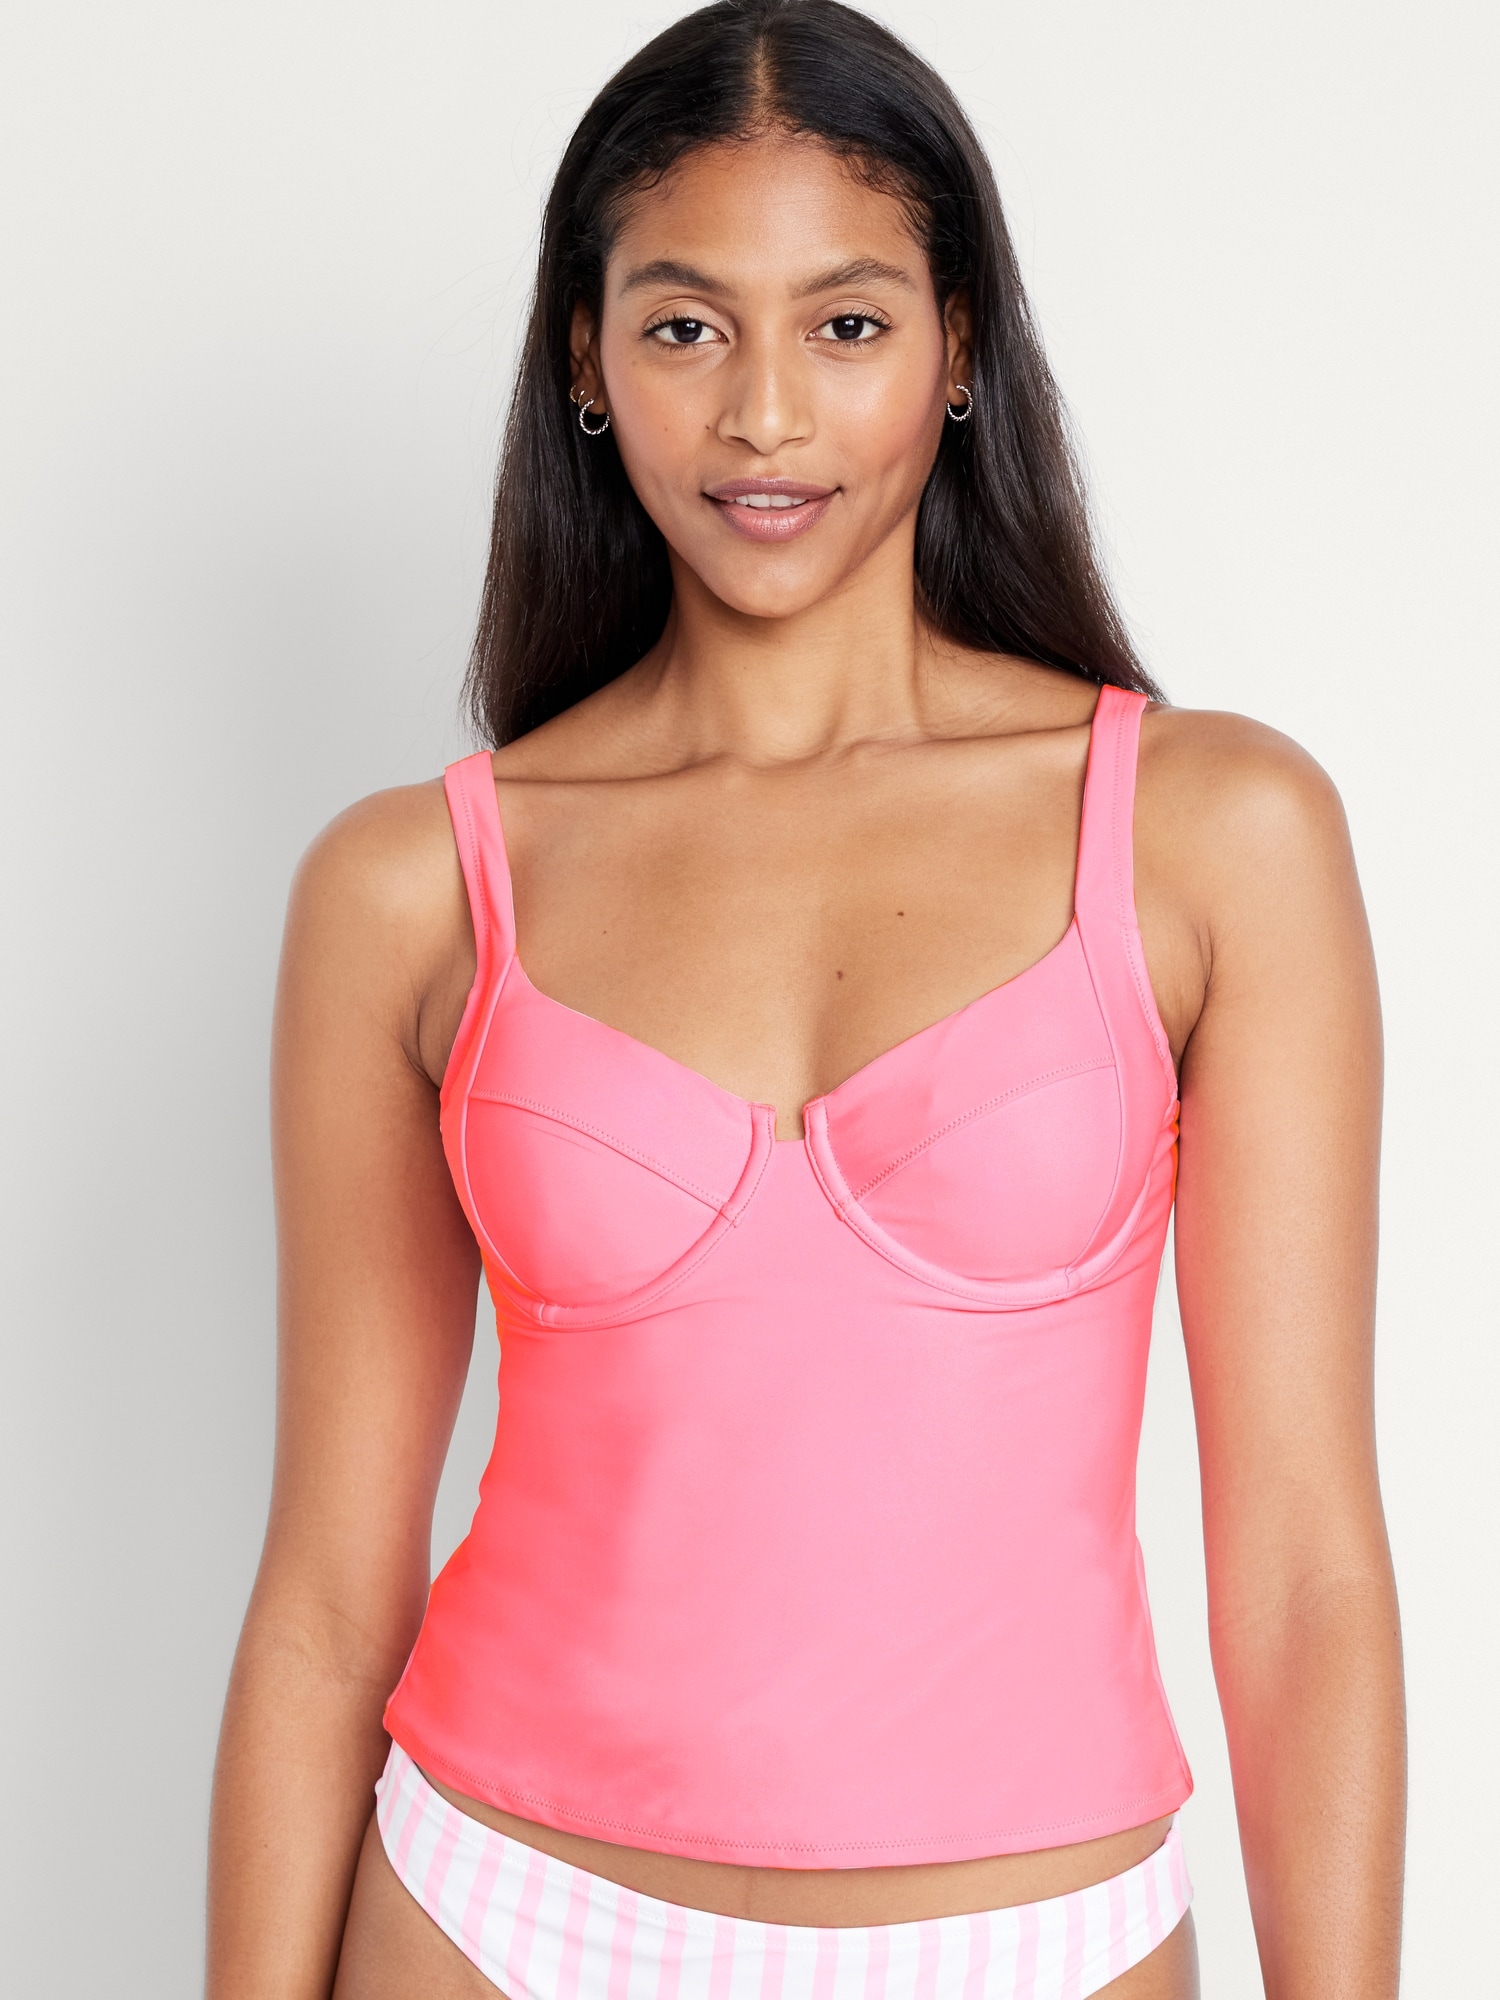 gvdentm Tank Tops With Built In Bras Women's Secrets All Over